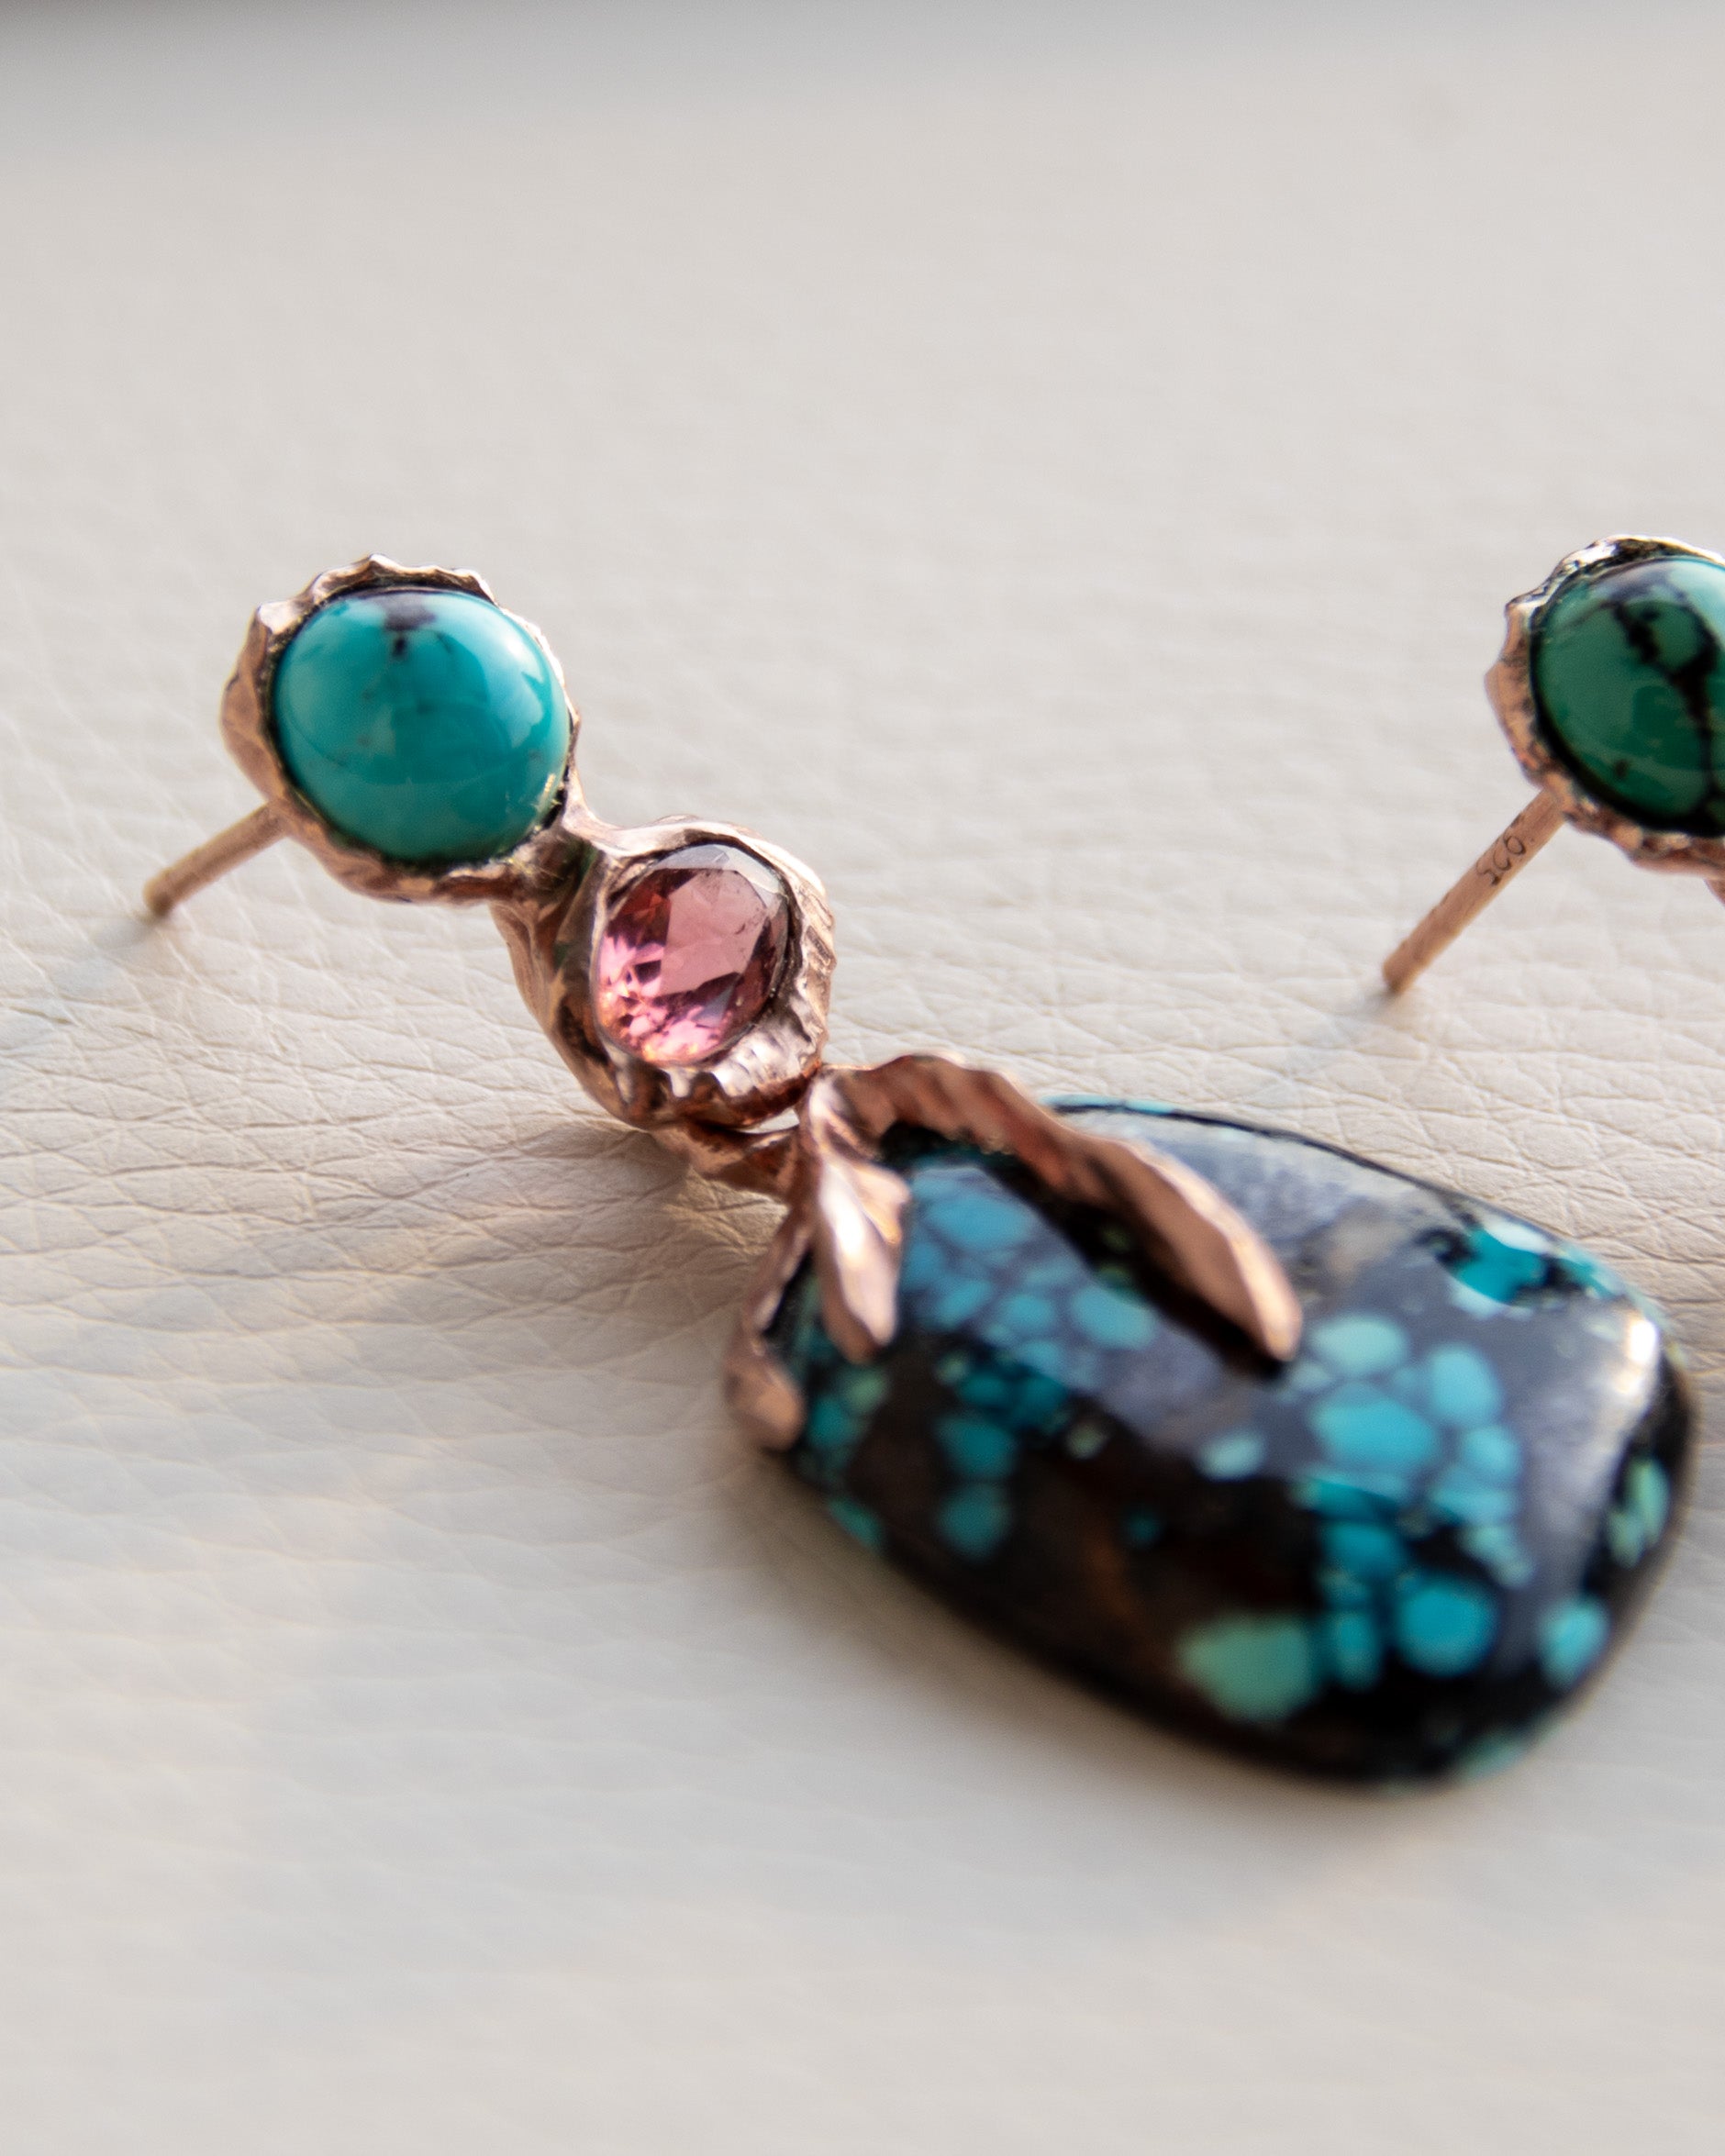 Close up of the Lava Earrings with turquoise and pink tourmaline set in 18K rose gold